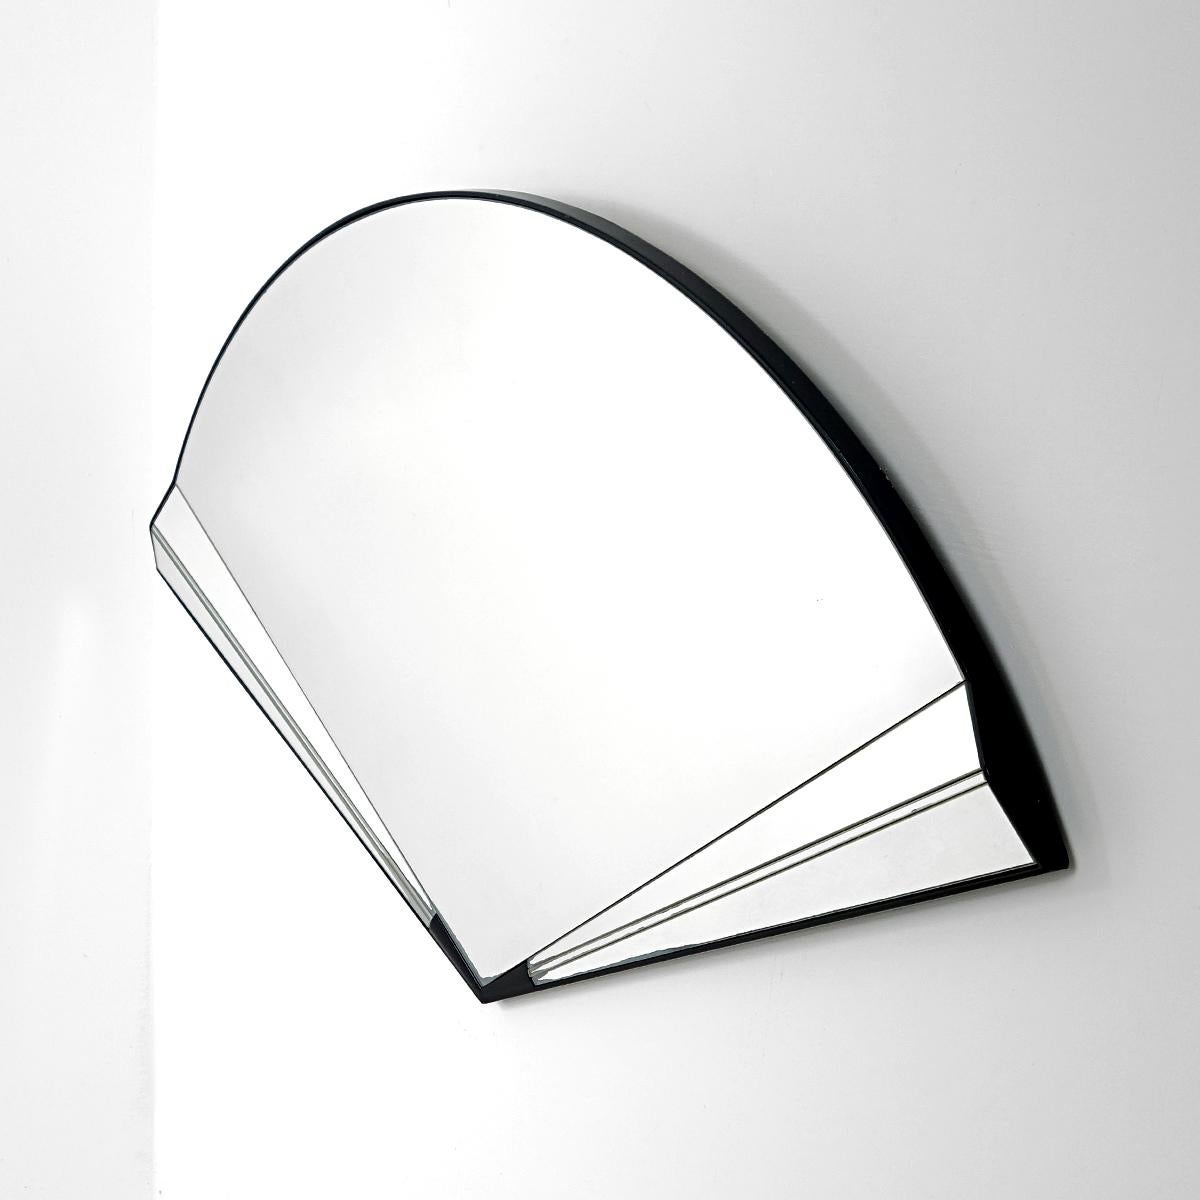 Playful wall mirror in the shape of a handheld fan.